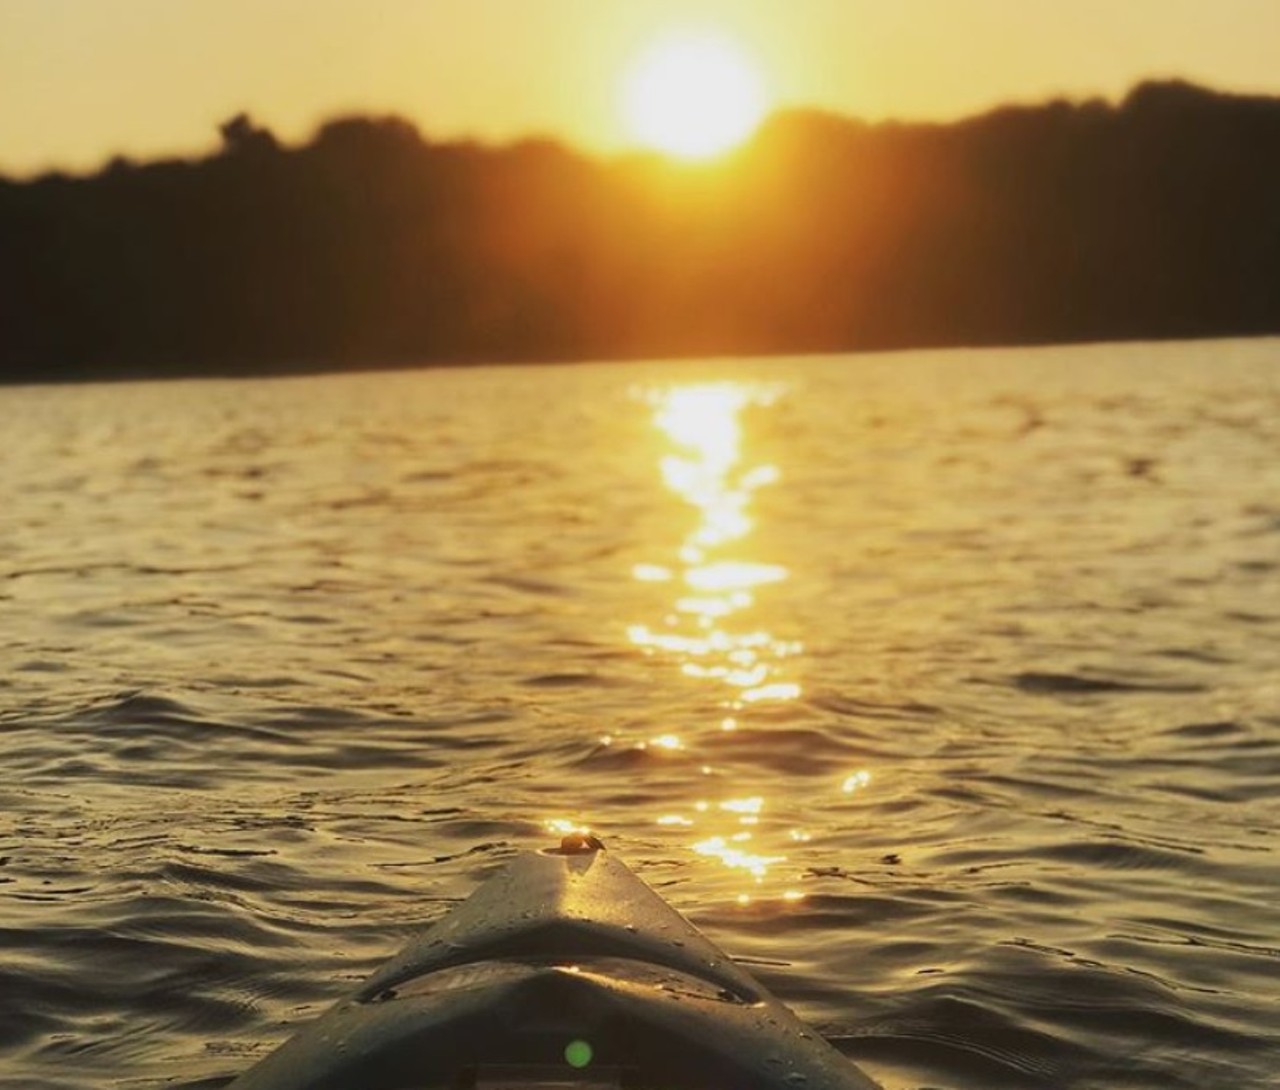 Alum Creek State Park
3305 S. Old State Road, Delaware, 740-548-4631
If you&#146;re looking for a little piece of paradise to soak up some rays, this park could be your next destination. Check out the beach and the boating opportunities.
Photo via juju_b_23/Instagram